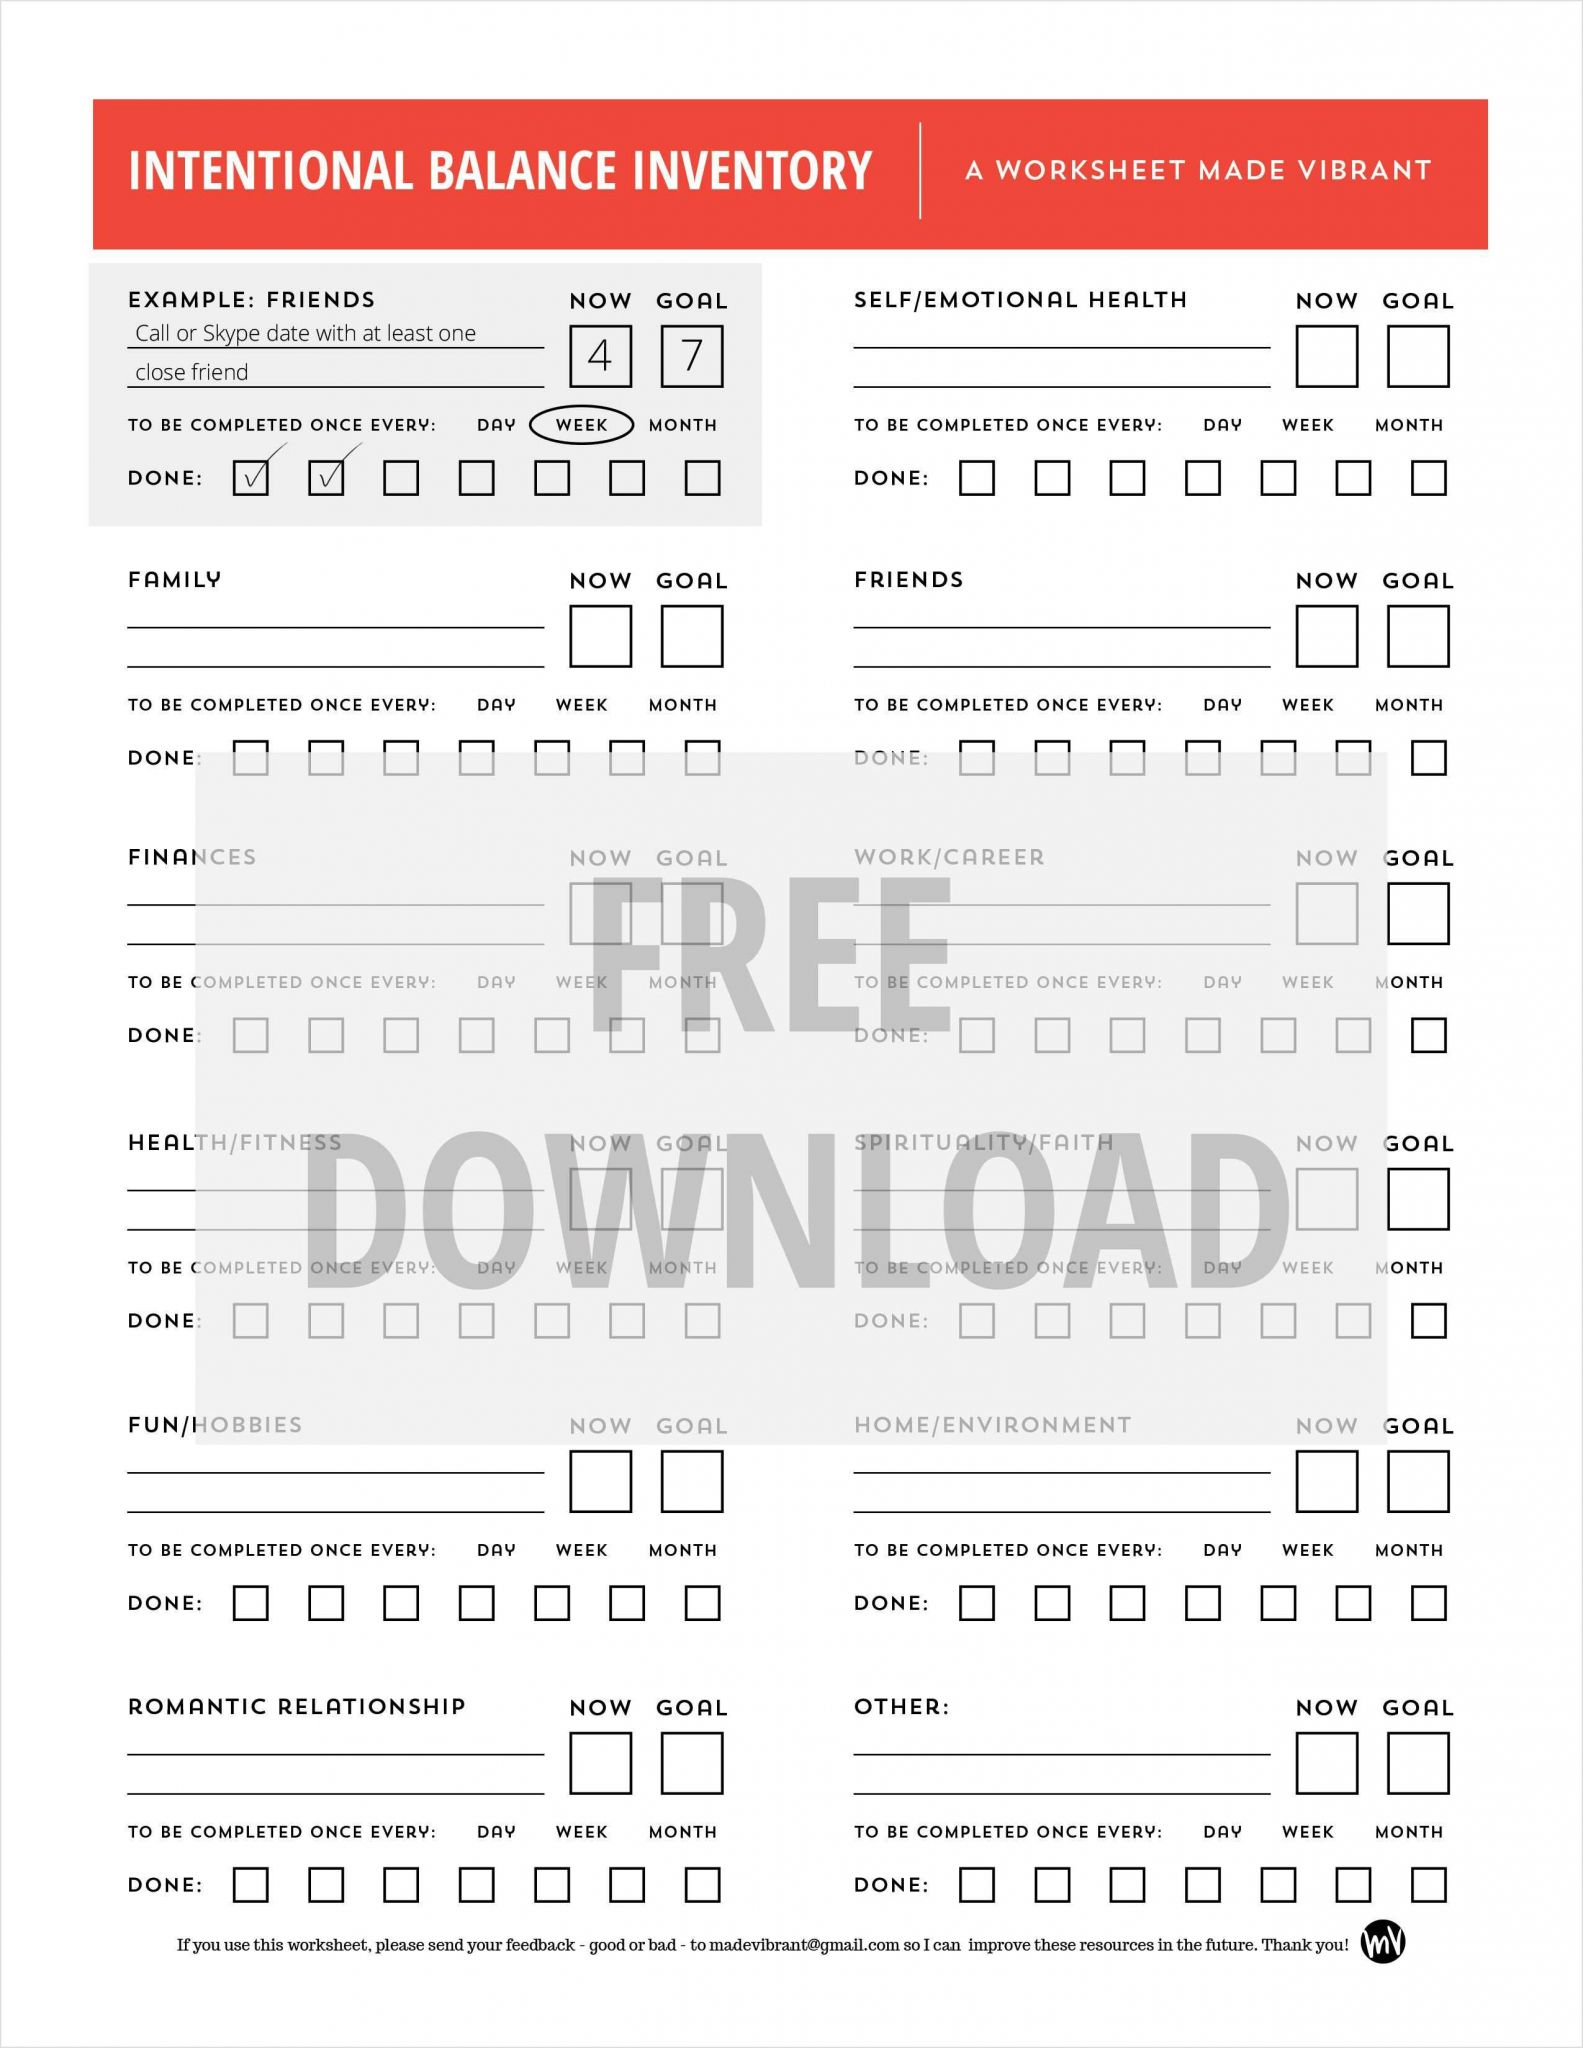 Parenting Plan Worksheet with Personal Development Worksheet Intentional Balance Inventory